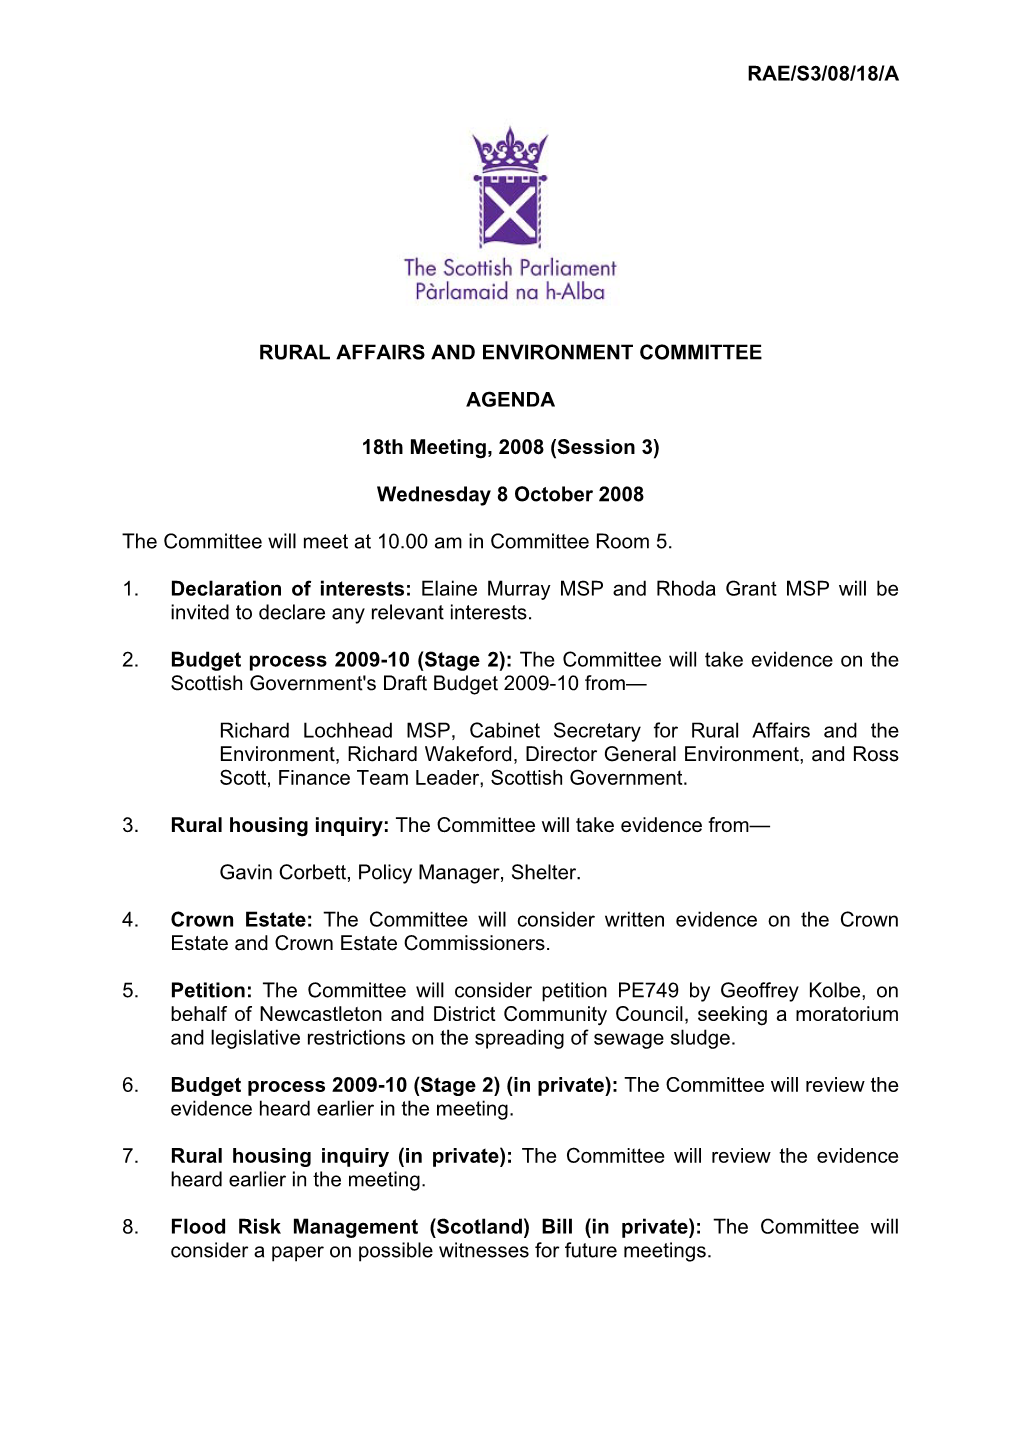 Rae/S3/08/18/A Rural Affairs and Environment Committee